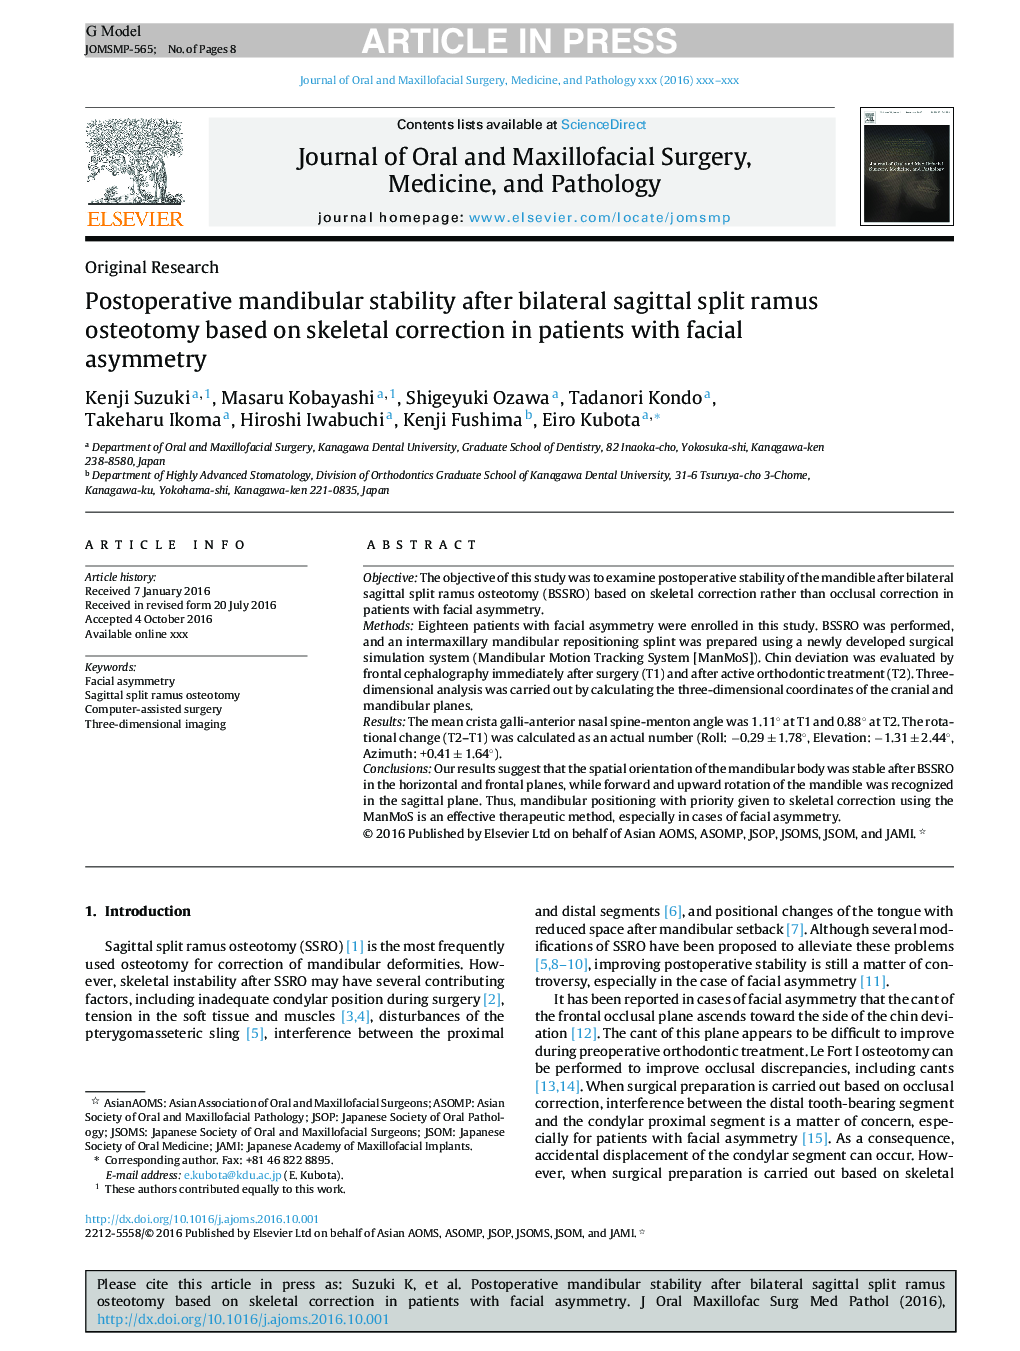 Postoperative mandibular stability after bilateral sagittal split ramus osteotomy based on skeletal correction in patients with facial asymmetry